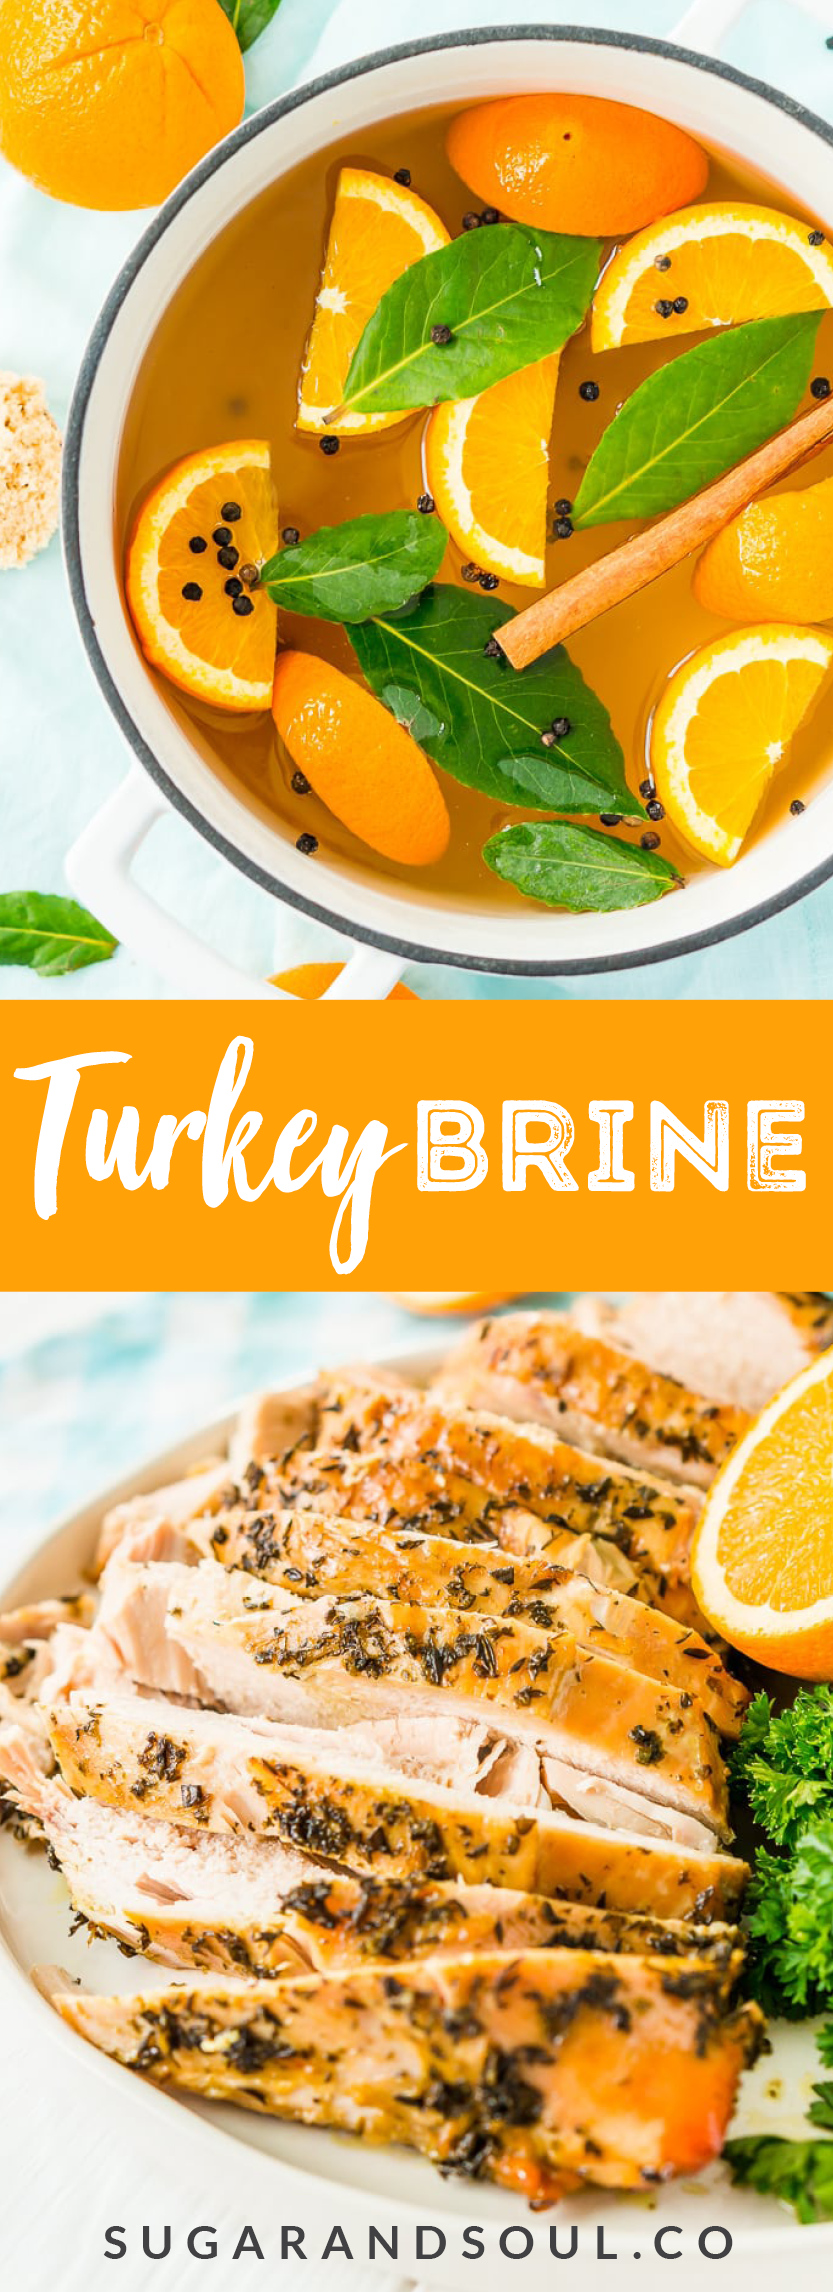 This Turkey Brine recipe made with salt, oranges, bay leaves, cinnamon, brown sugar, and black pepper will add moisture, tenderness, and flavor to your turkey. Brine turkey for 12 to 24 hours for the most amazing turkey for your holiday gathering! via @sugarandsoulco